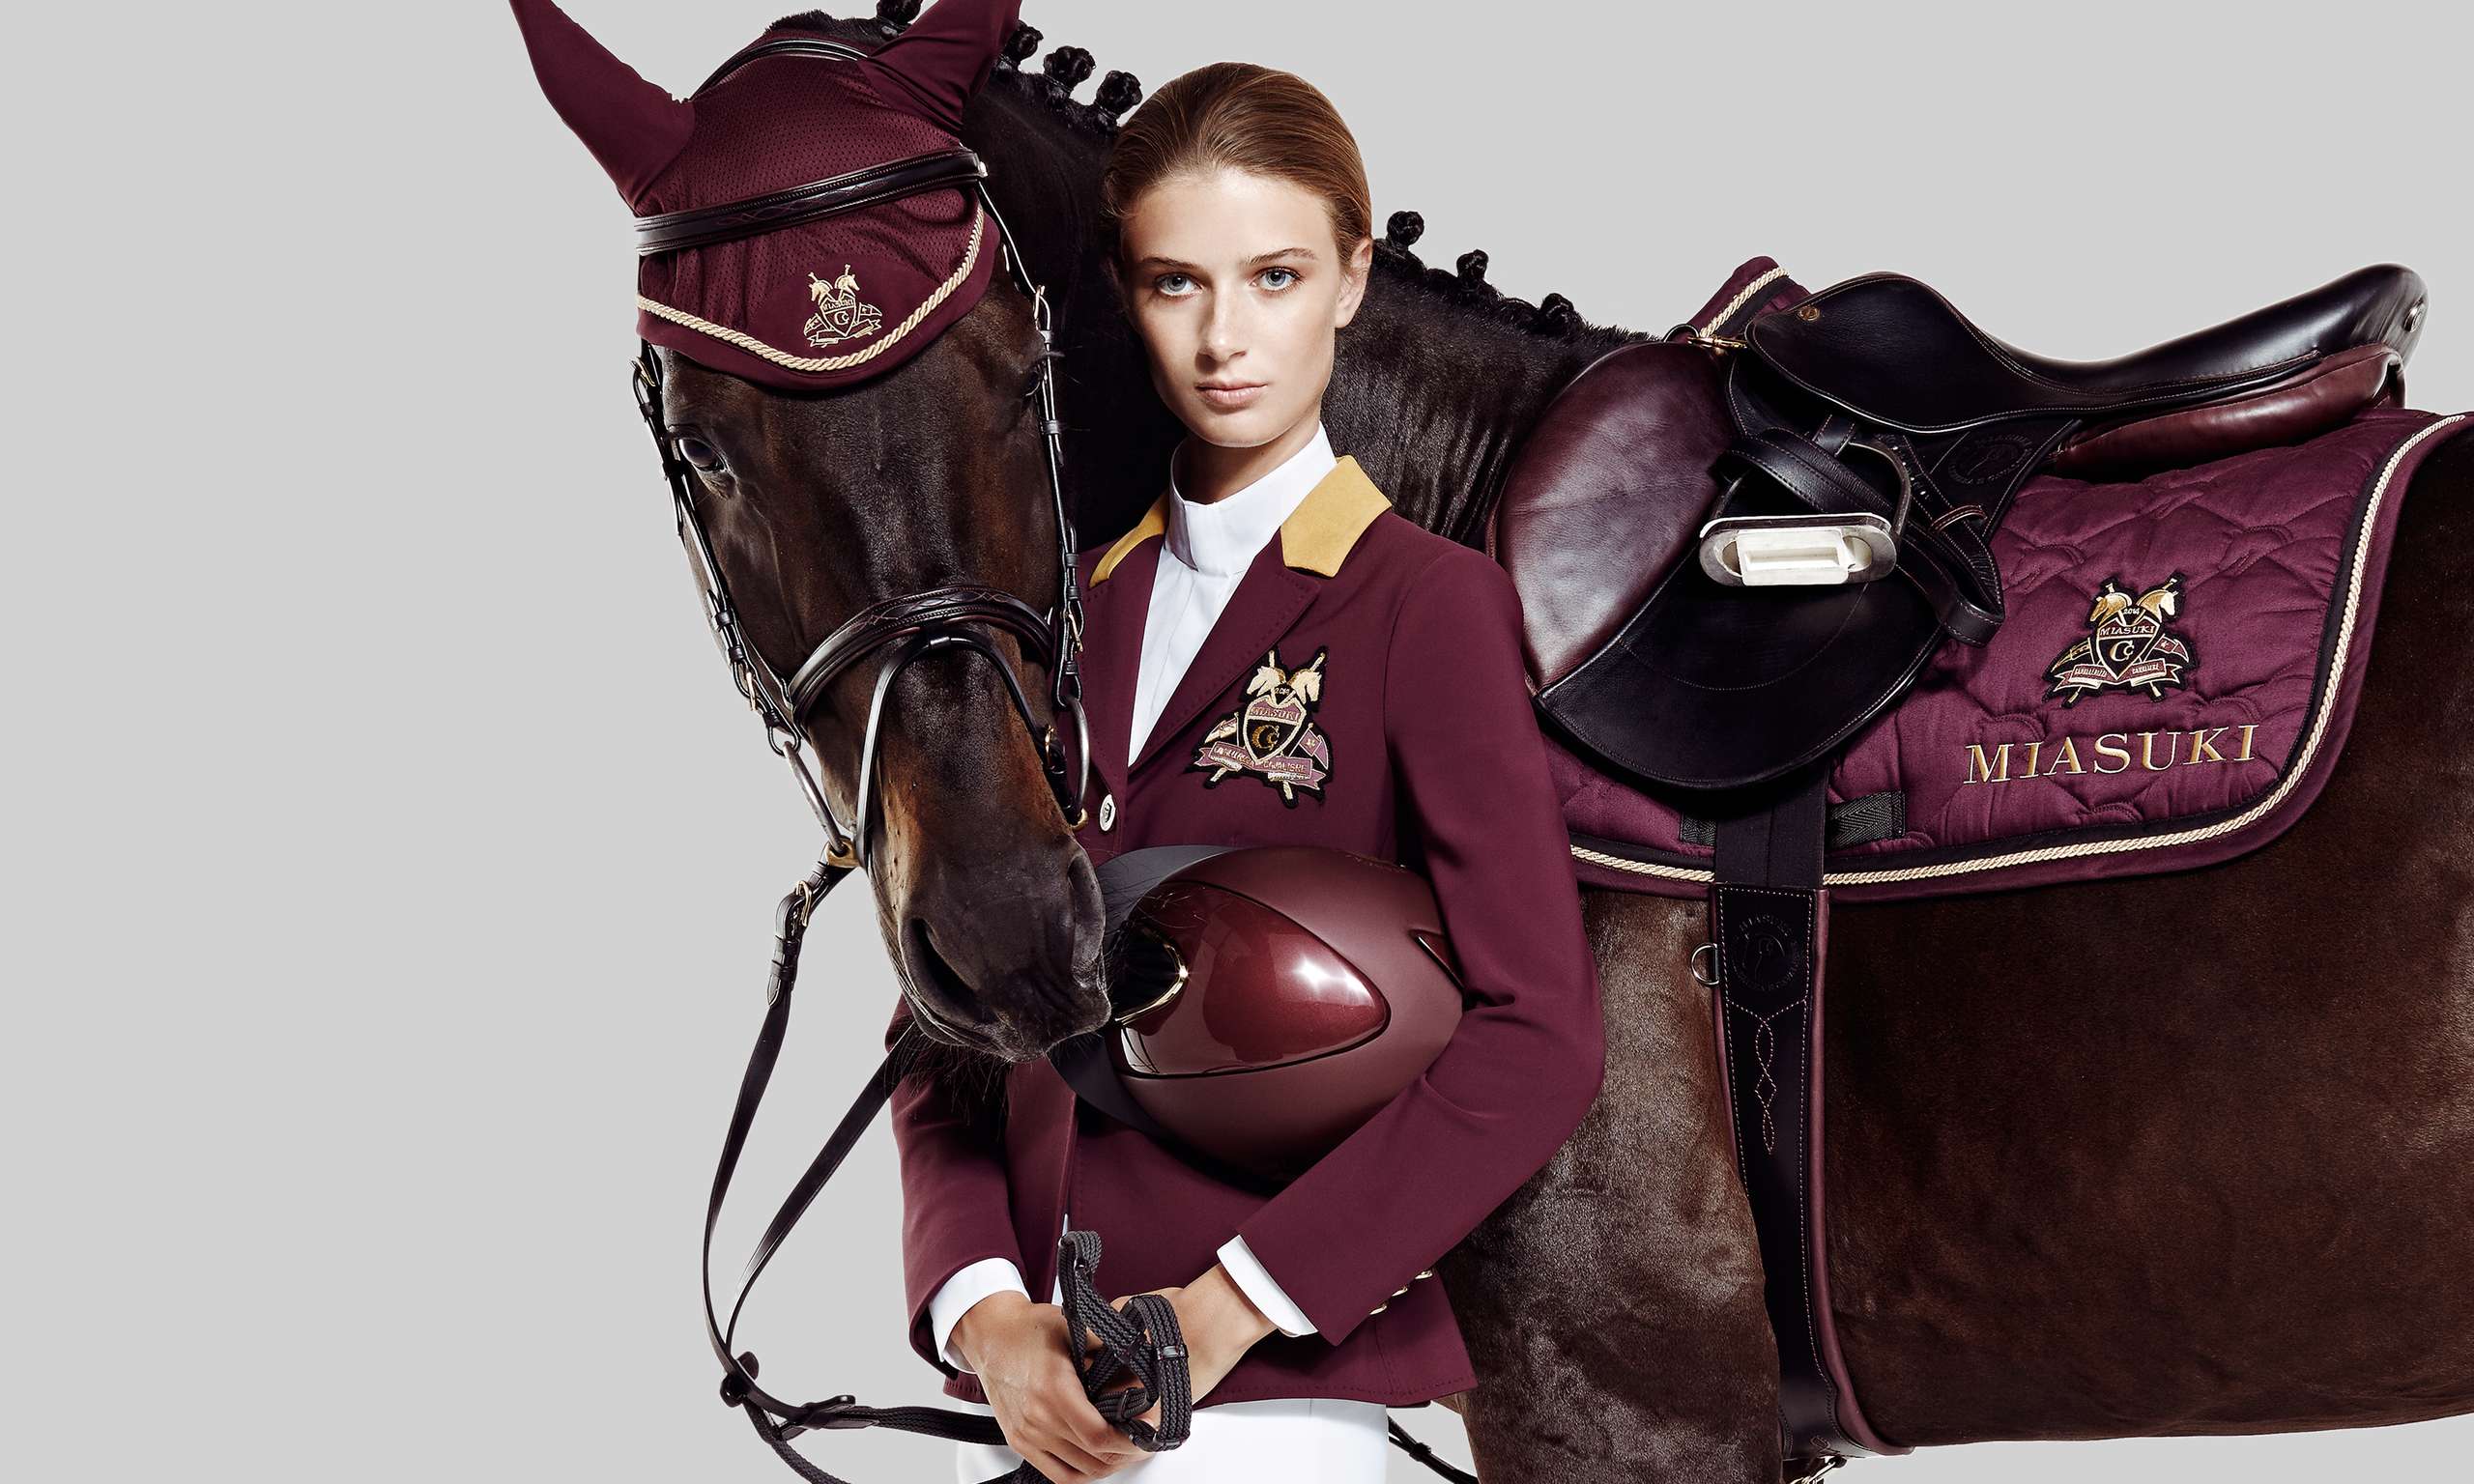 Female model in equistrian clothes and horse